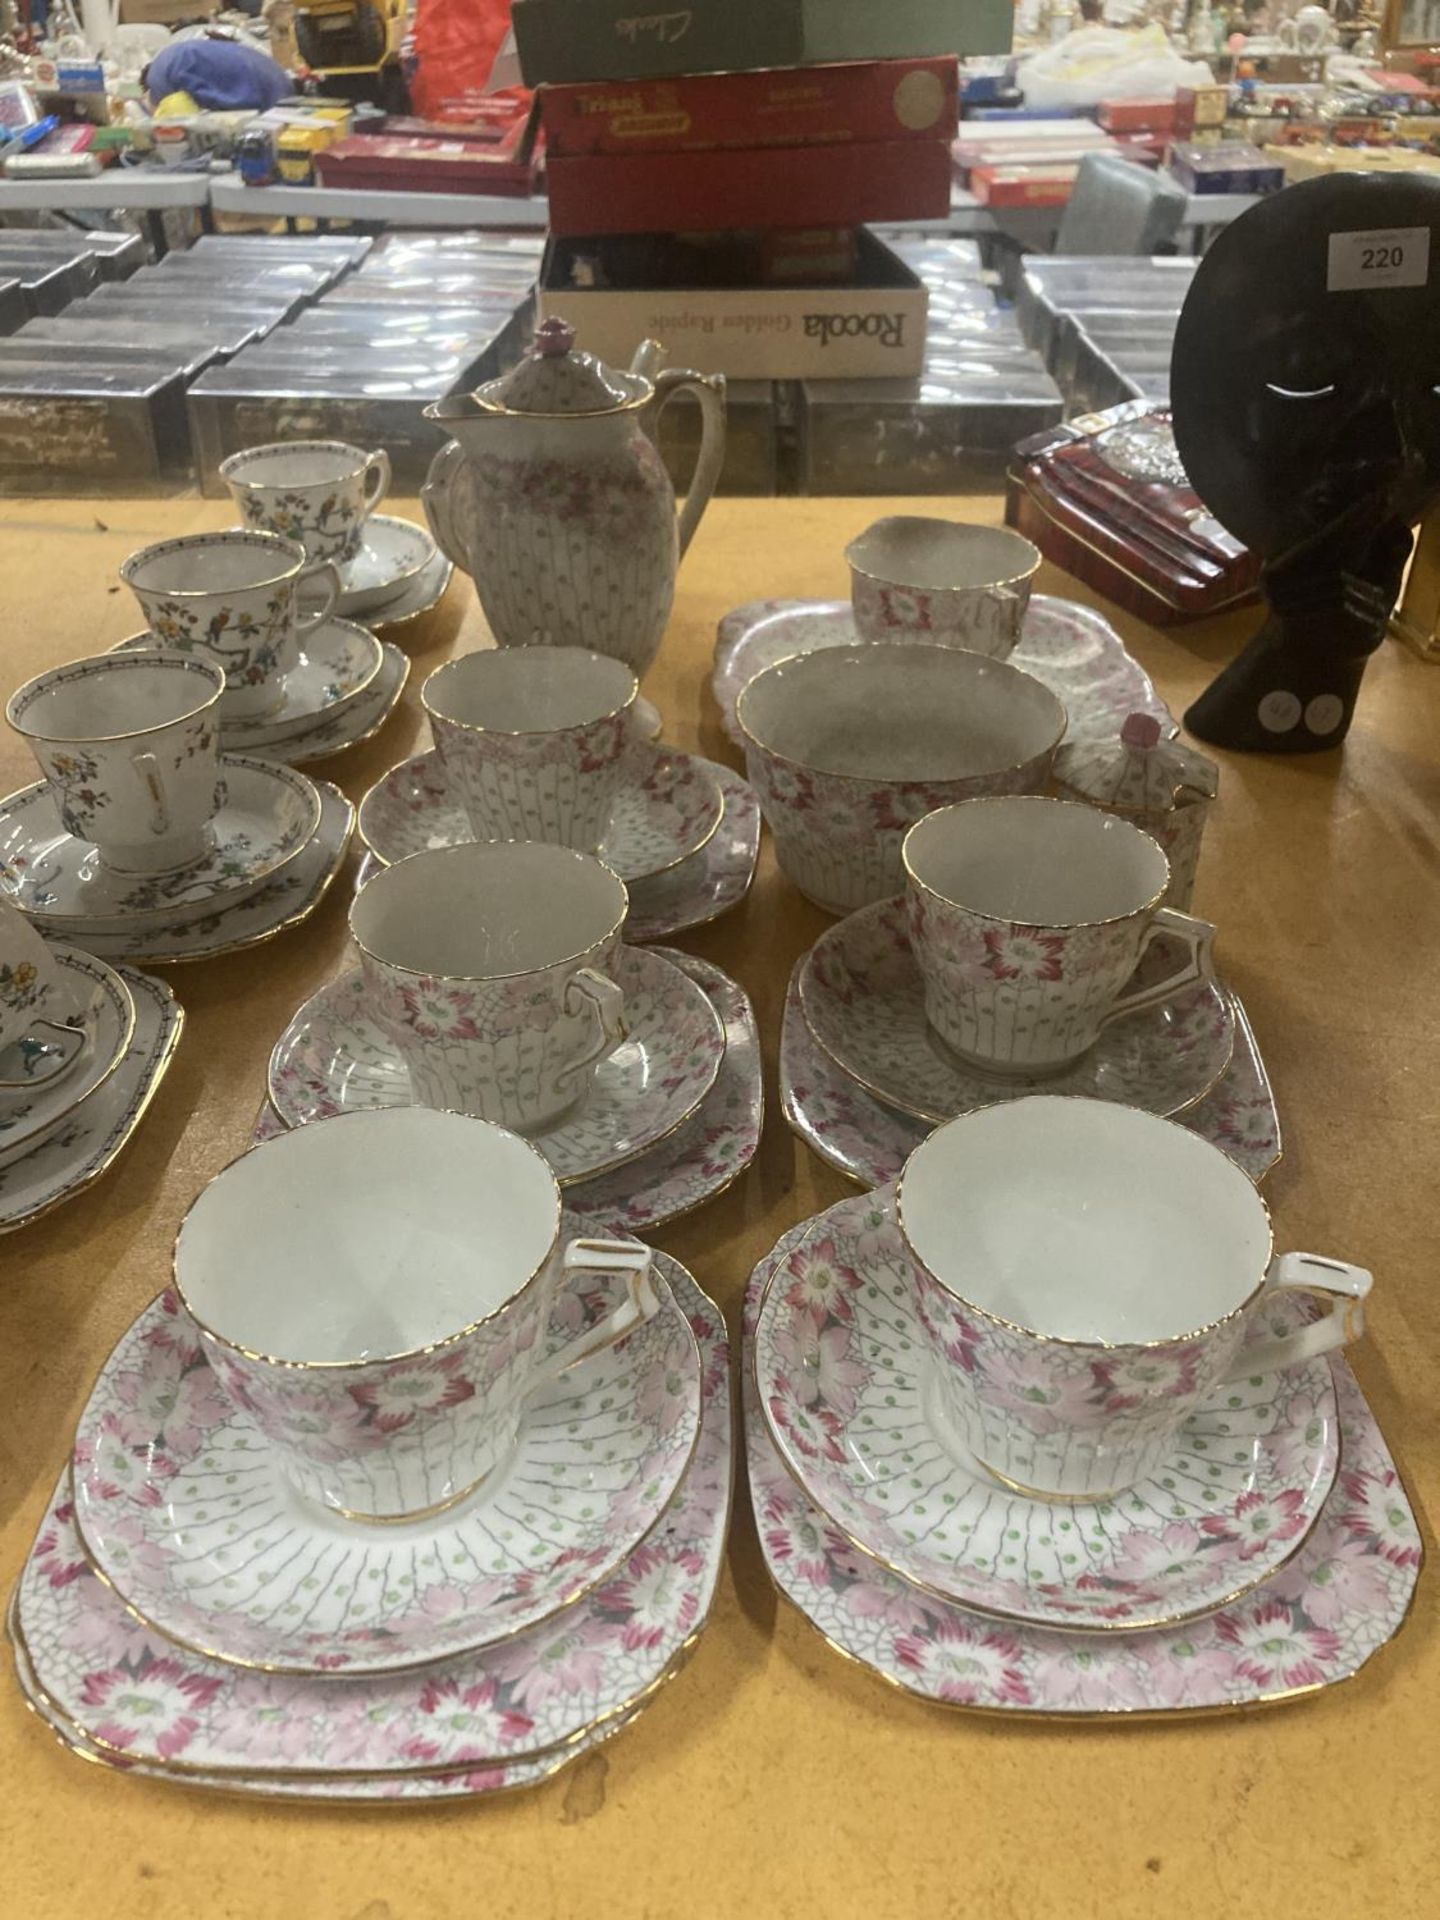 A DELPHINE CHINA TEA AND COFFEE SET IN A PALE PINK FLORAL PATTERN TO INCLUDE A TEA POT, COFFEE